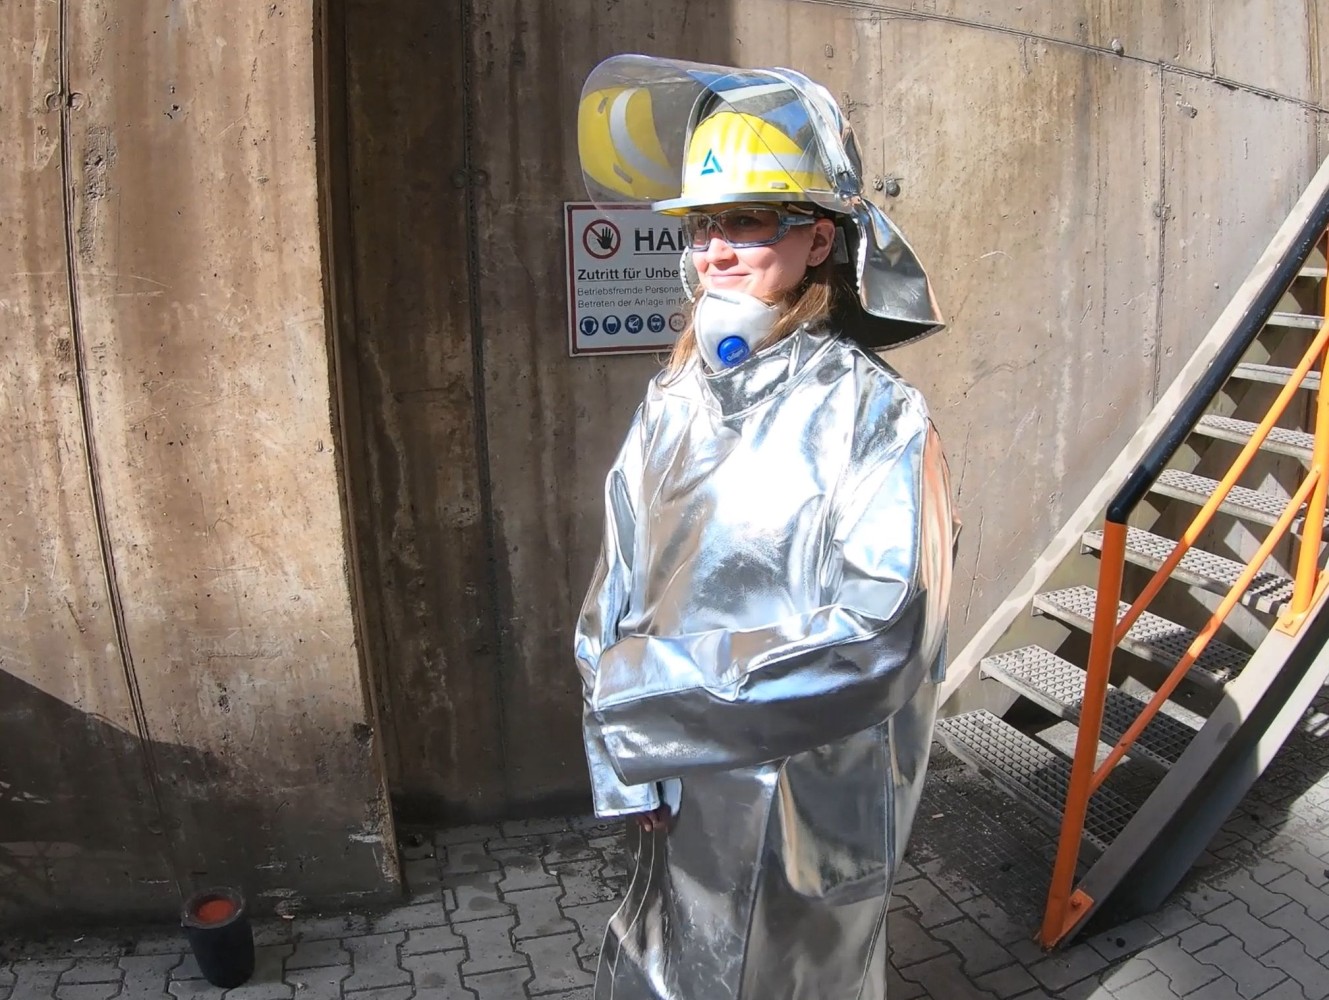 Elise François in safety gear prior to on-line LIBS measurements